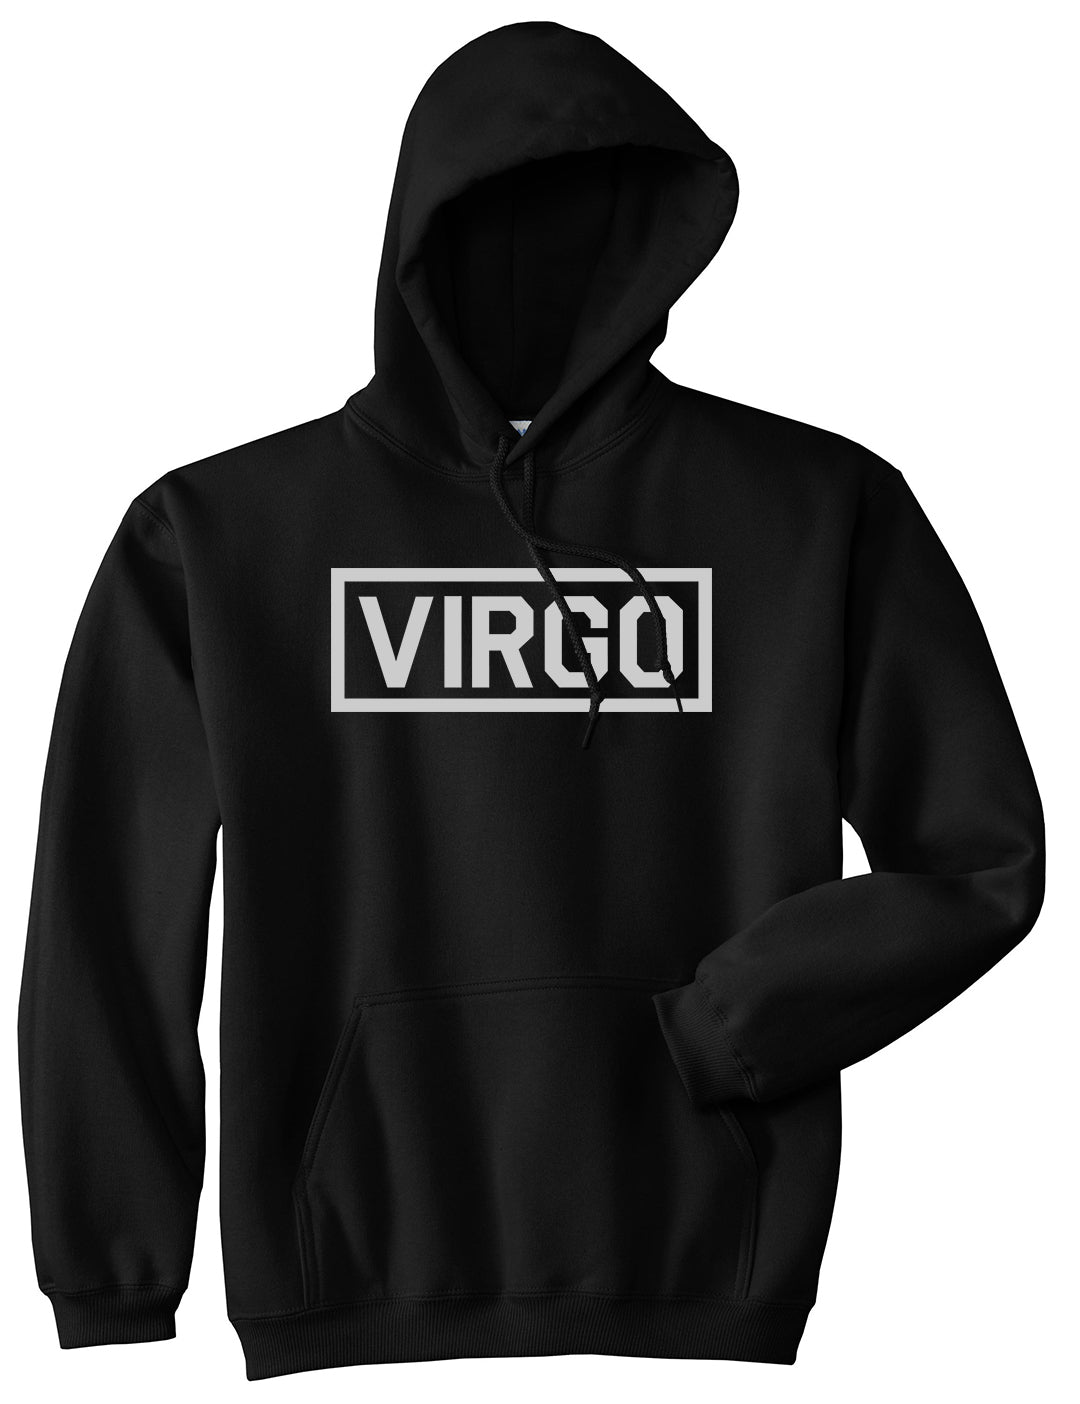 Virgo Horoscope Sign Mens Black Pullover Hoodie by KINGS OF NY